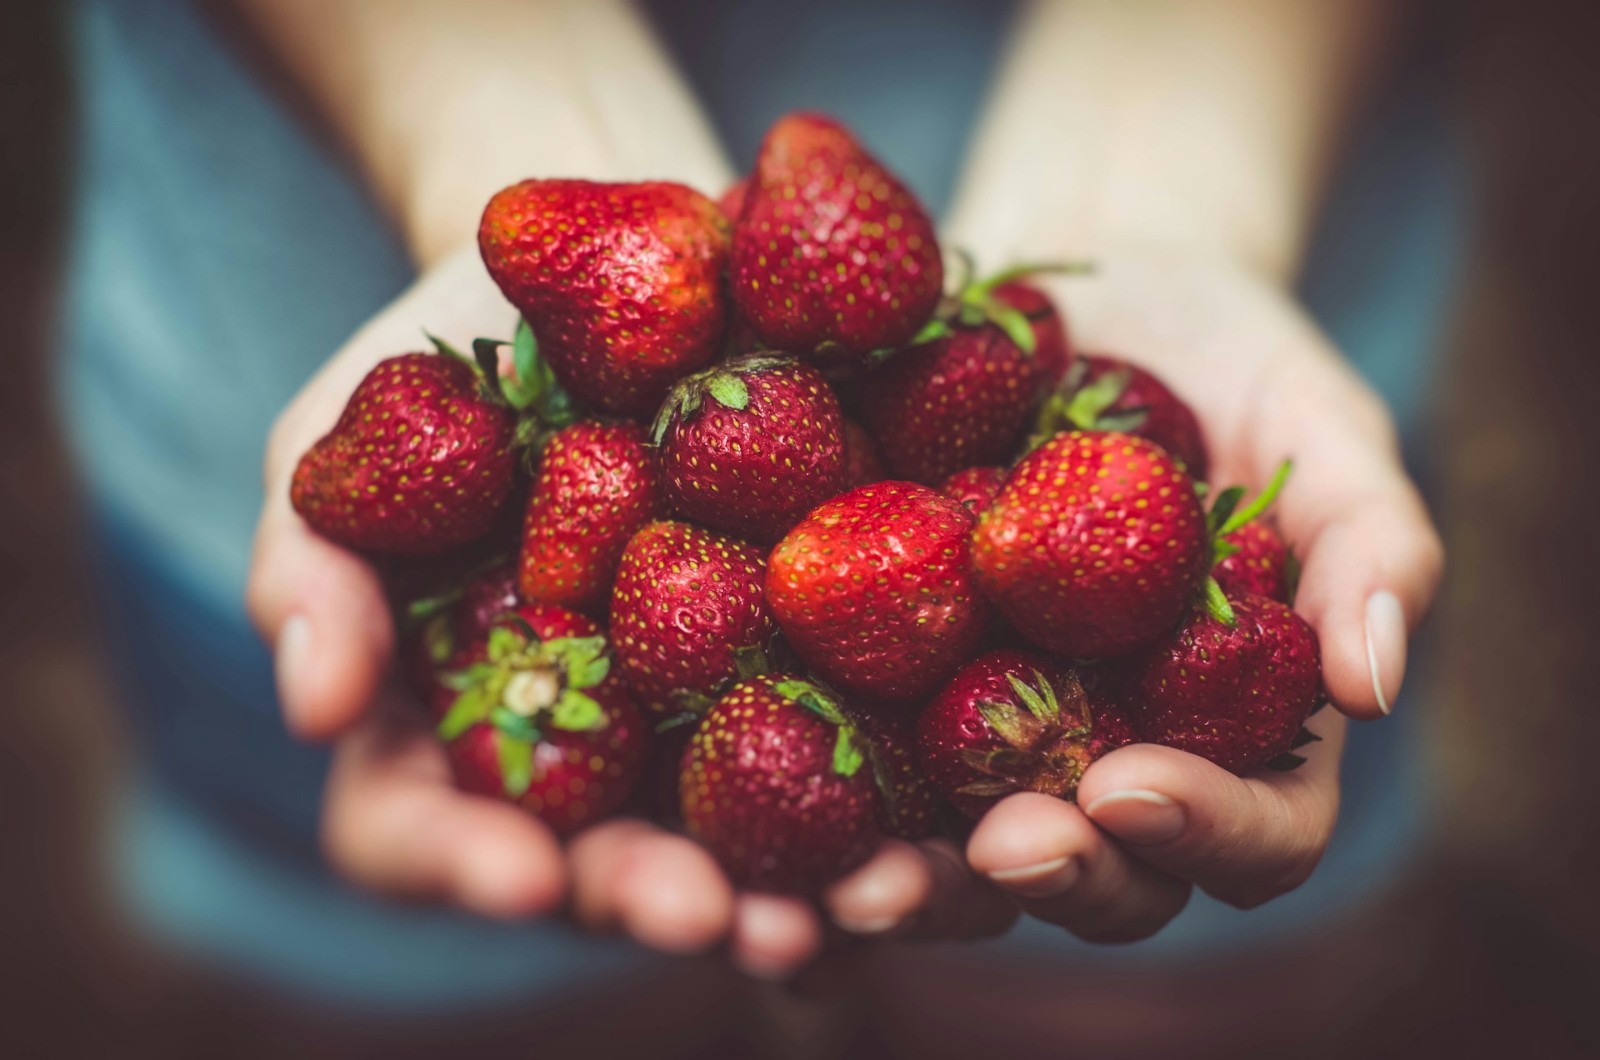 Strawberries in a woman's hands.